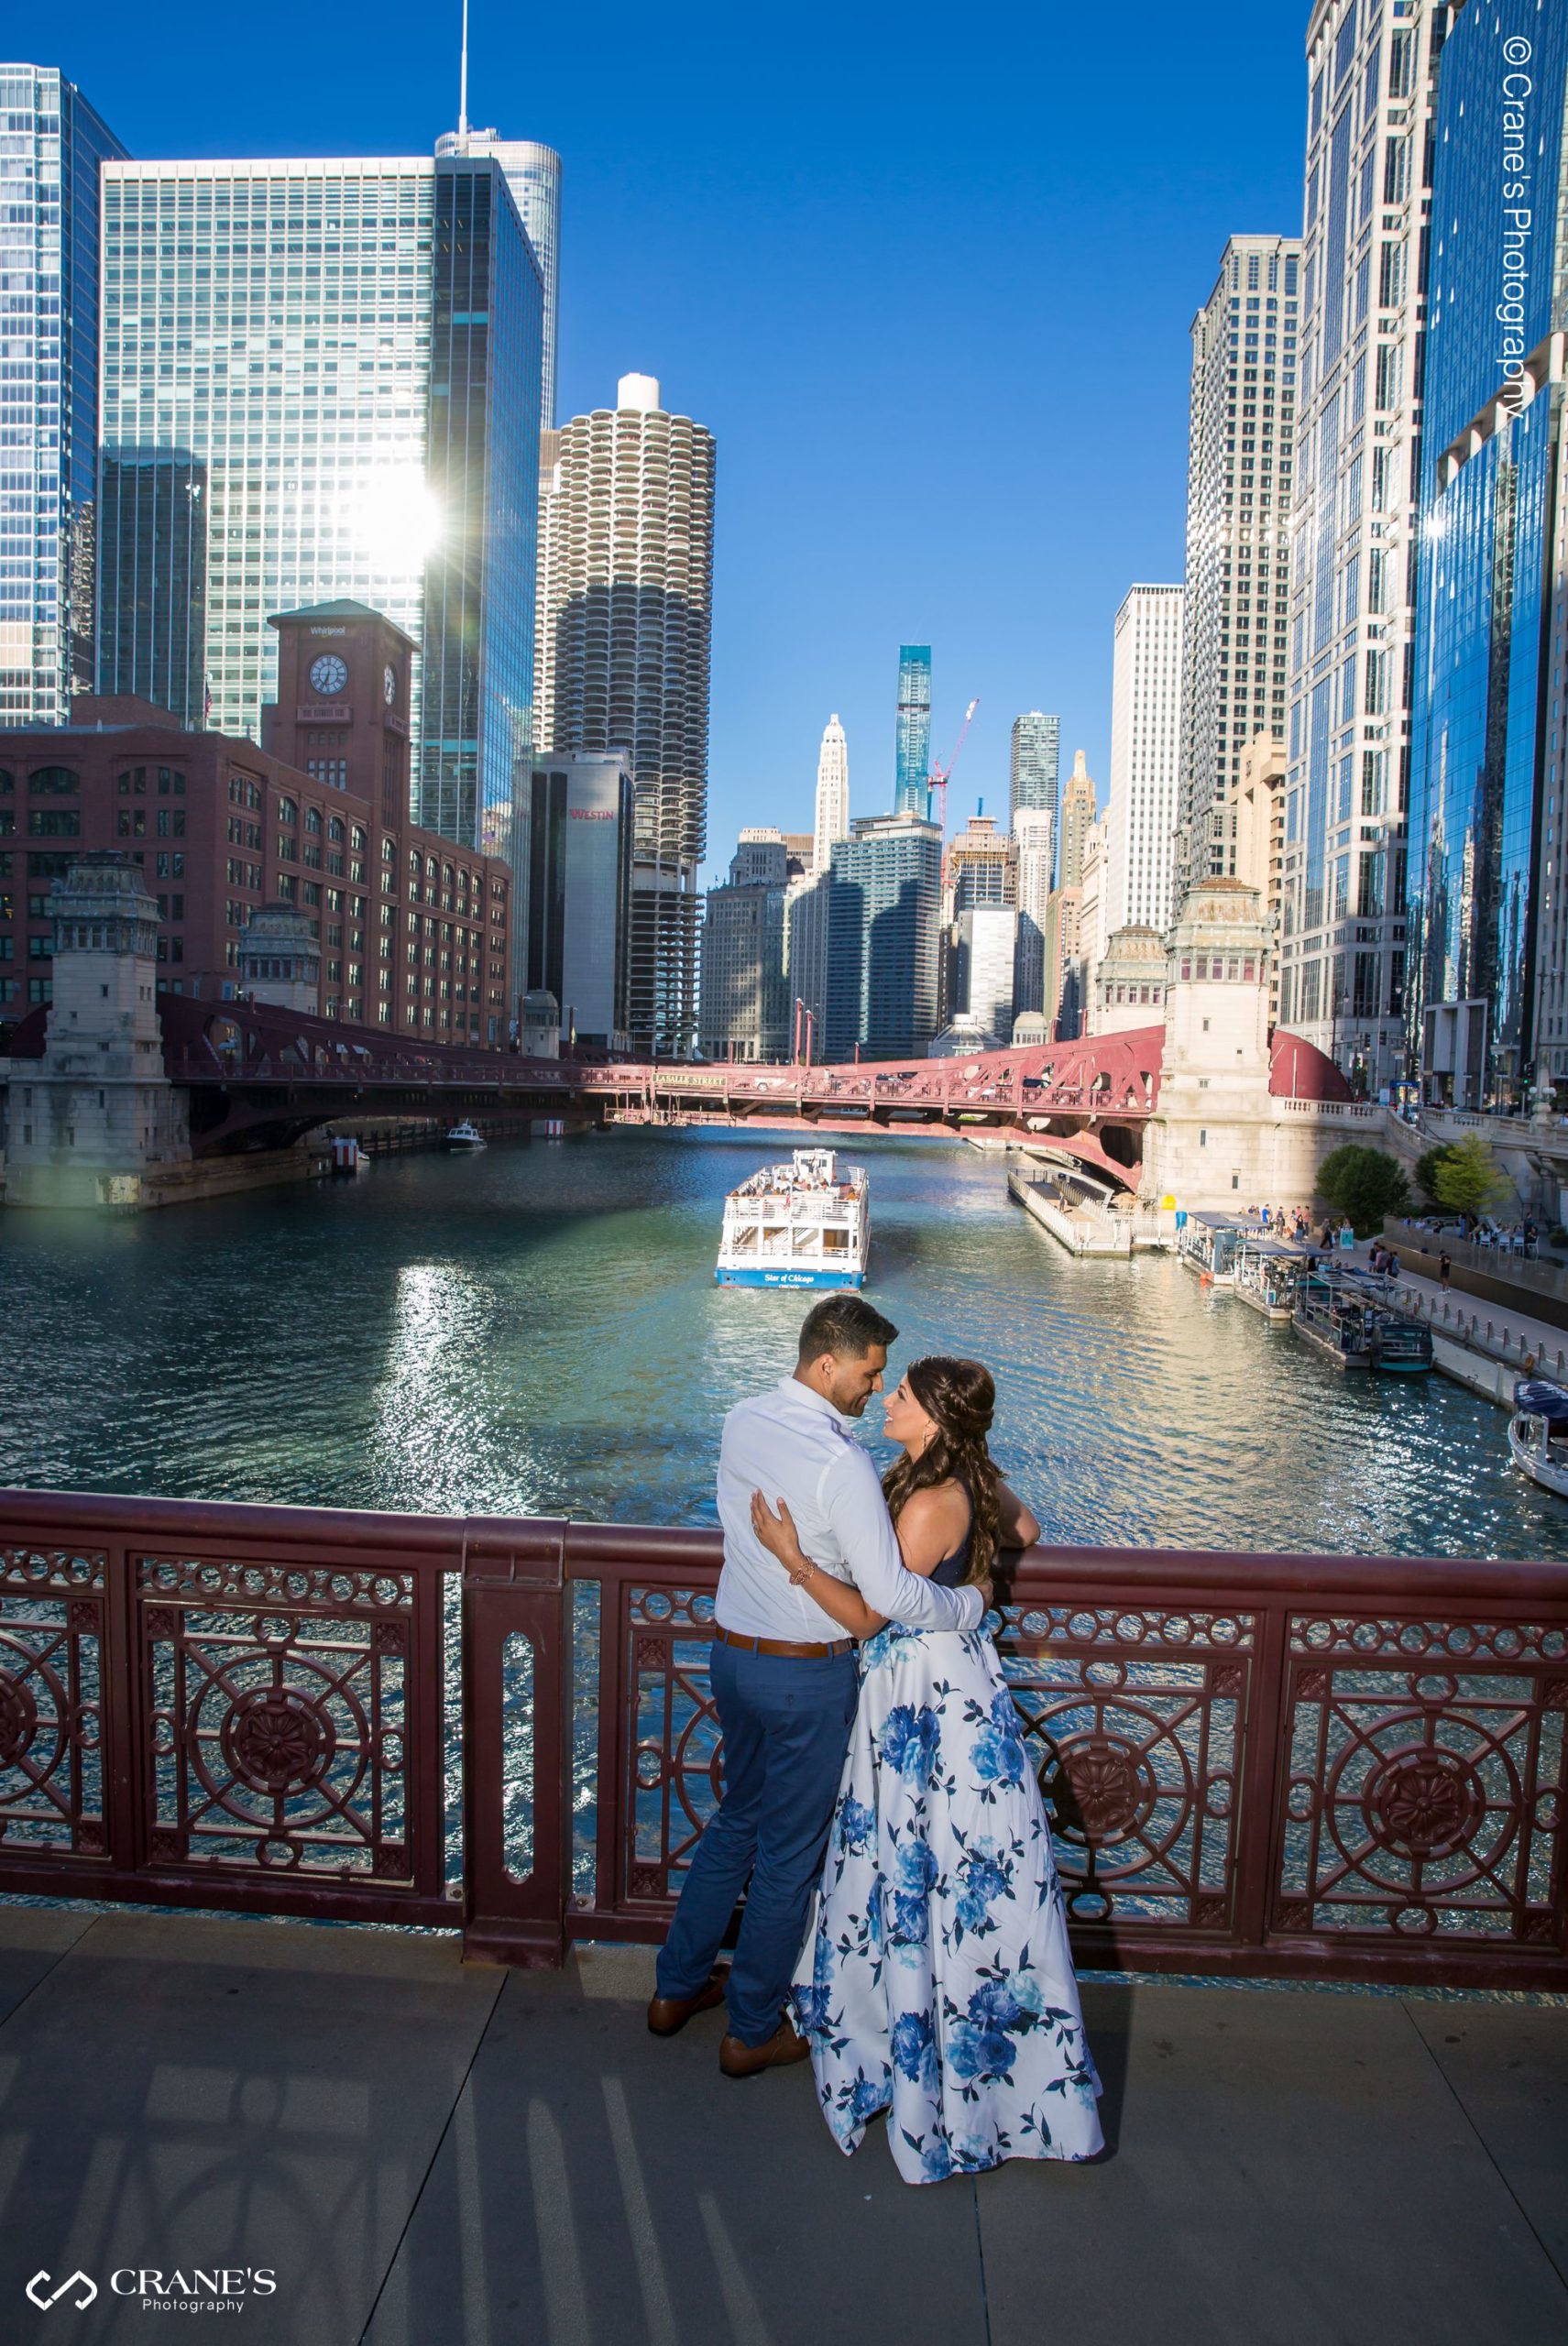 Engagement session photos of couple wearing formal wear taken on the Riverwalk in downtown Chicago